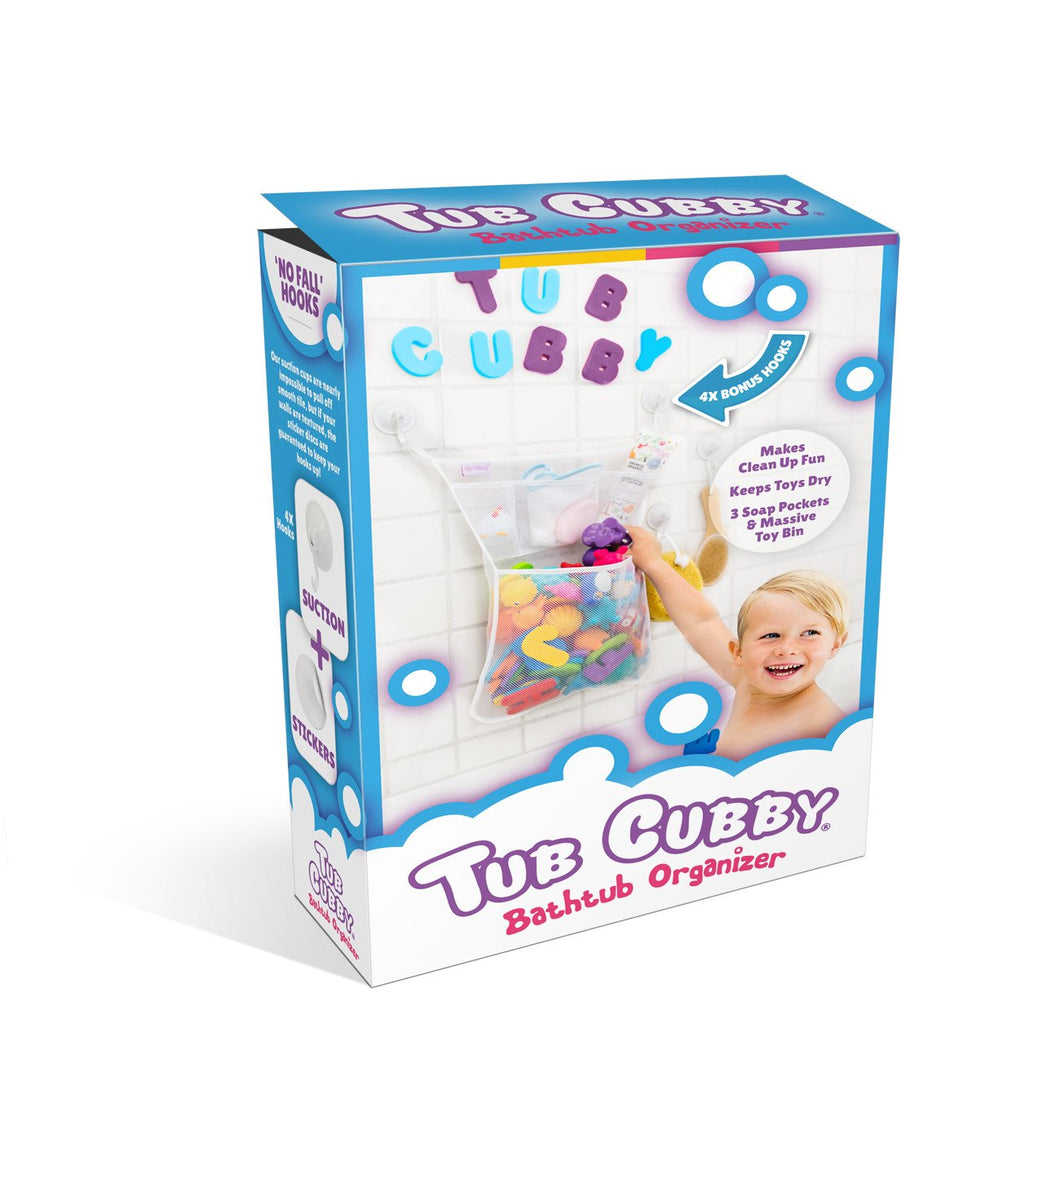 The Tub Cubby Makes Bath Time Fun and Neat